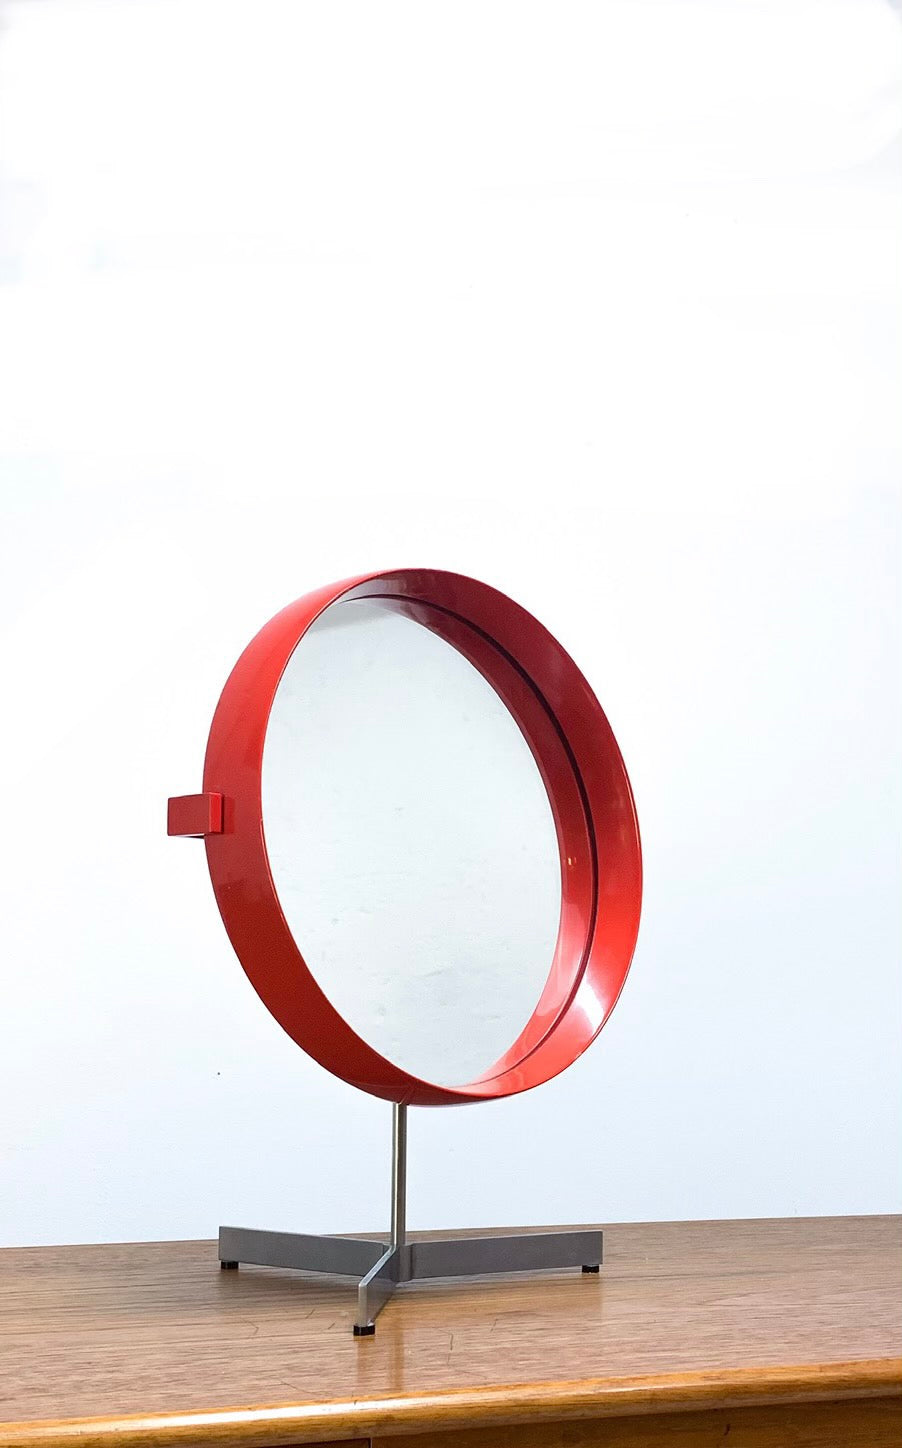 RARE TABLE MIRROR ”MODEL 417” BY LUXUS